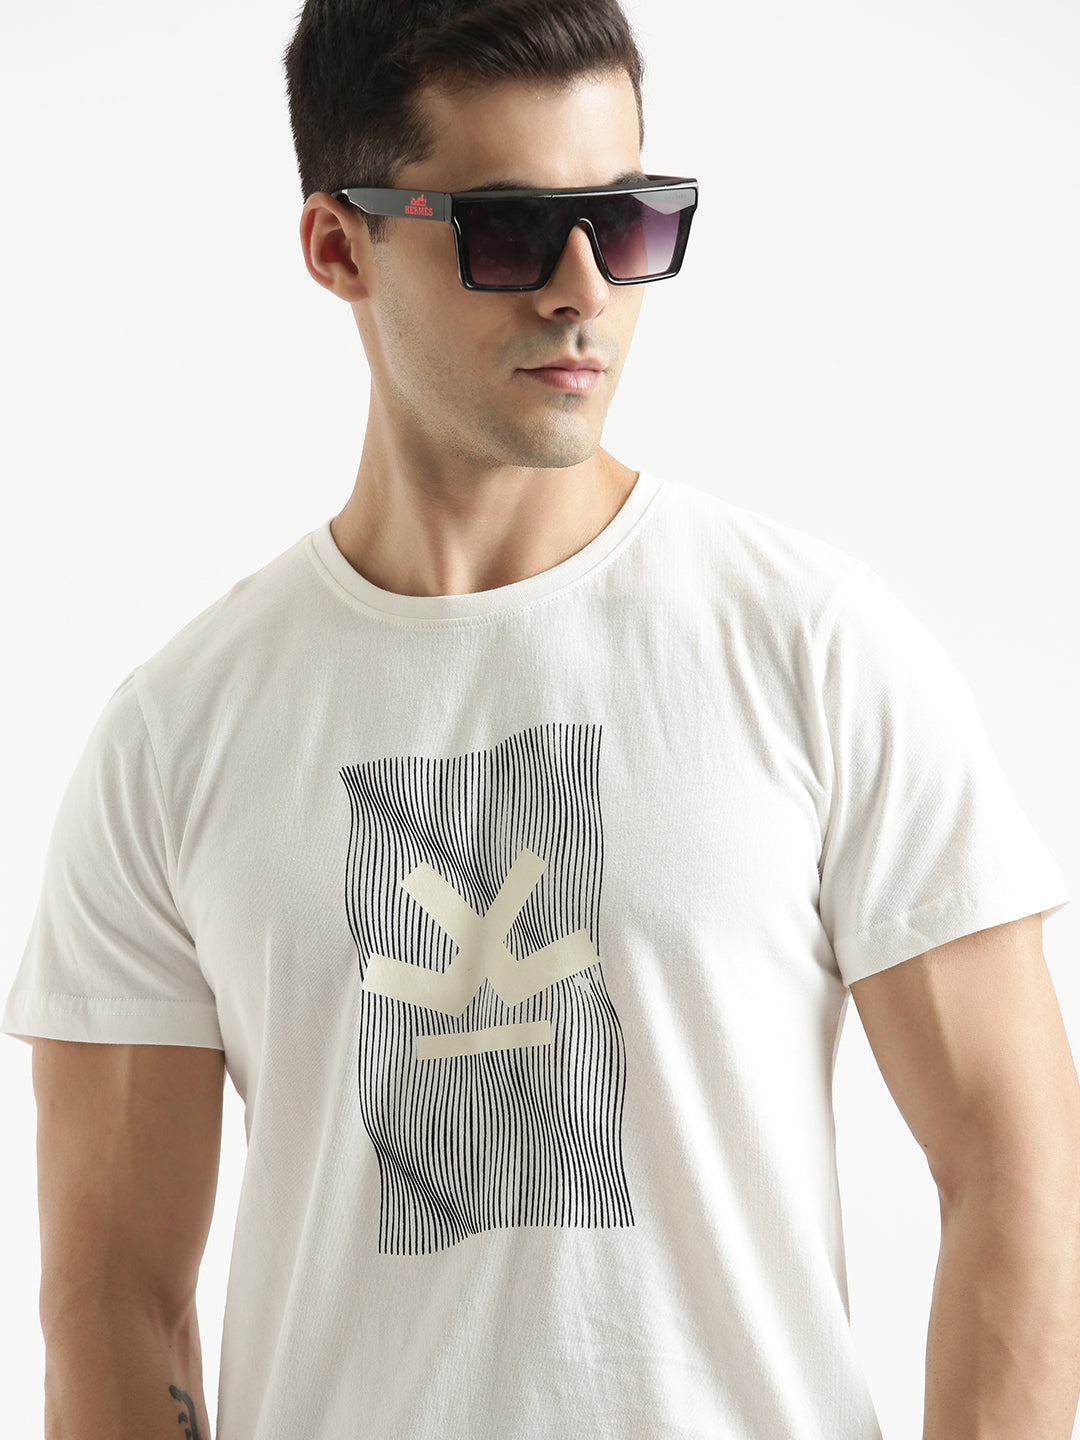 Groove Print Abstract T-shirt